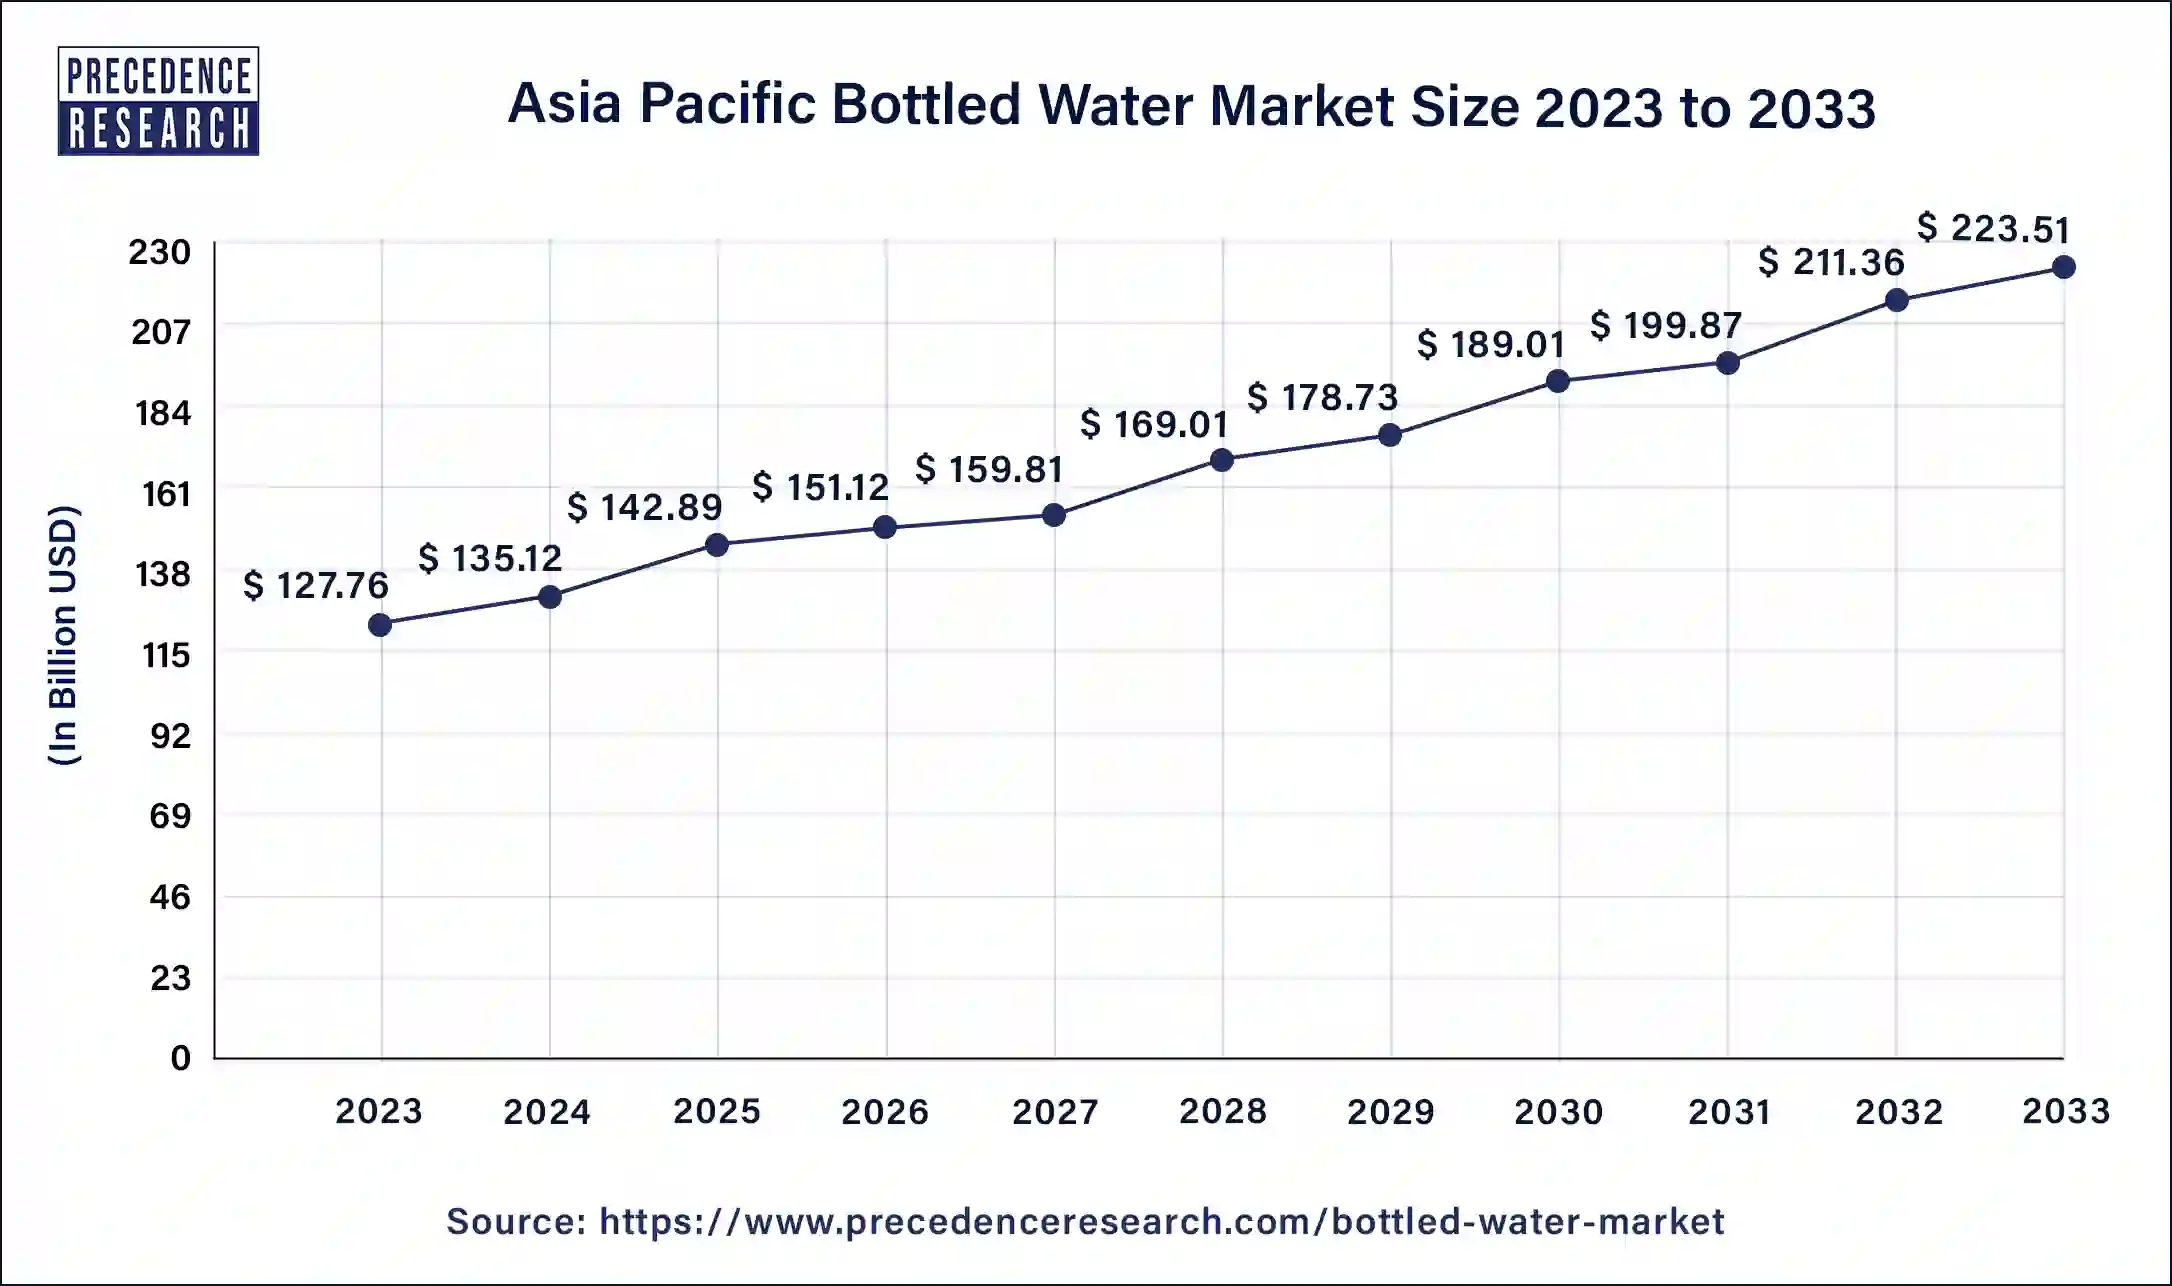 Asia Pacific Bottled Water Market Size 2024 to 2033